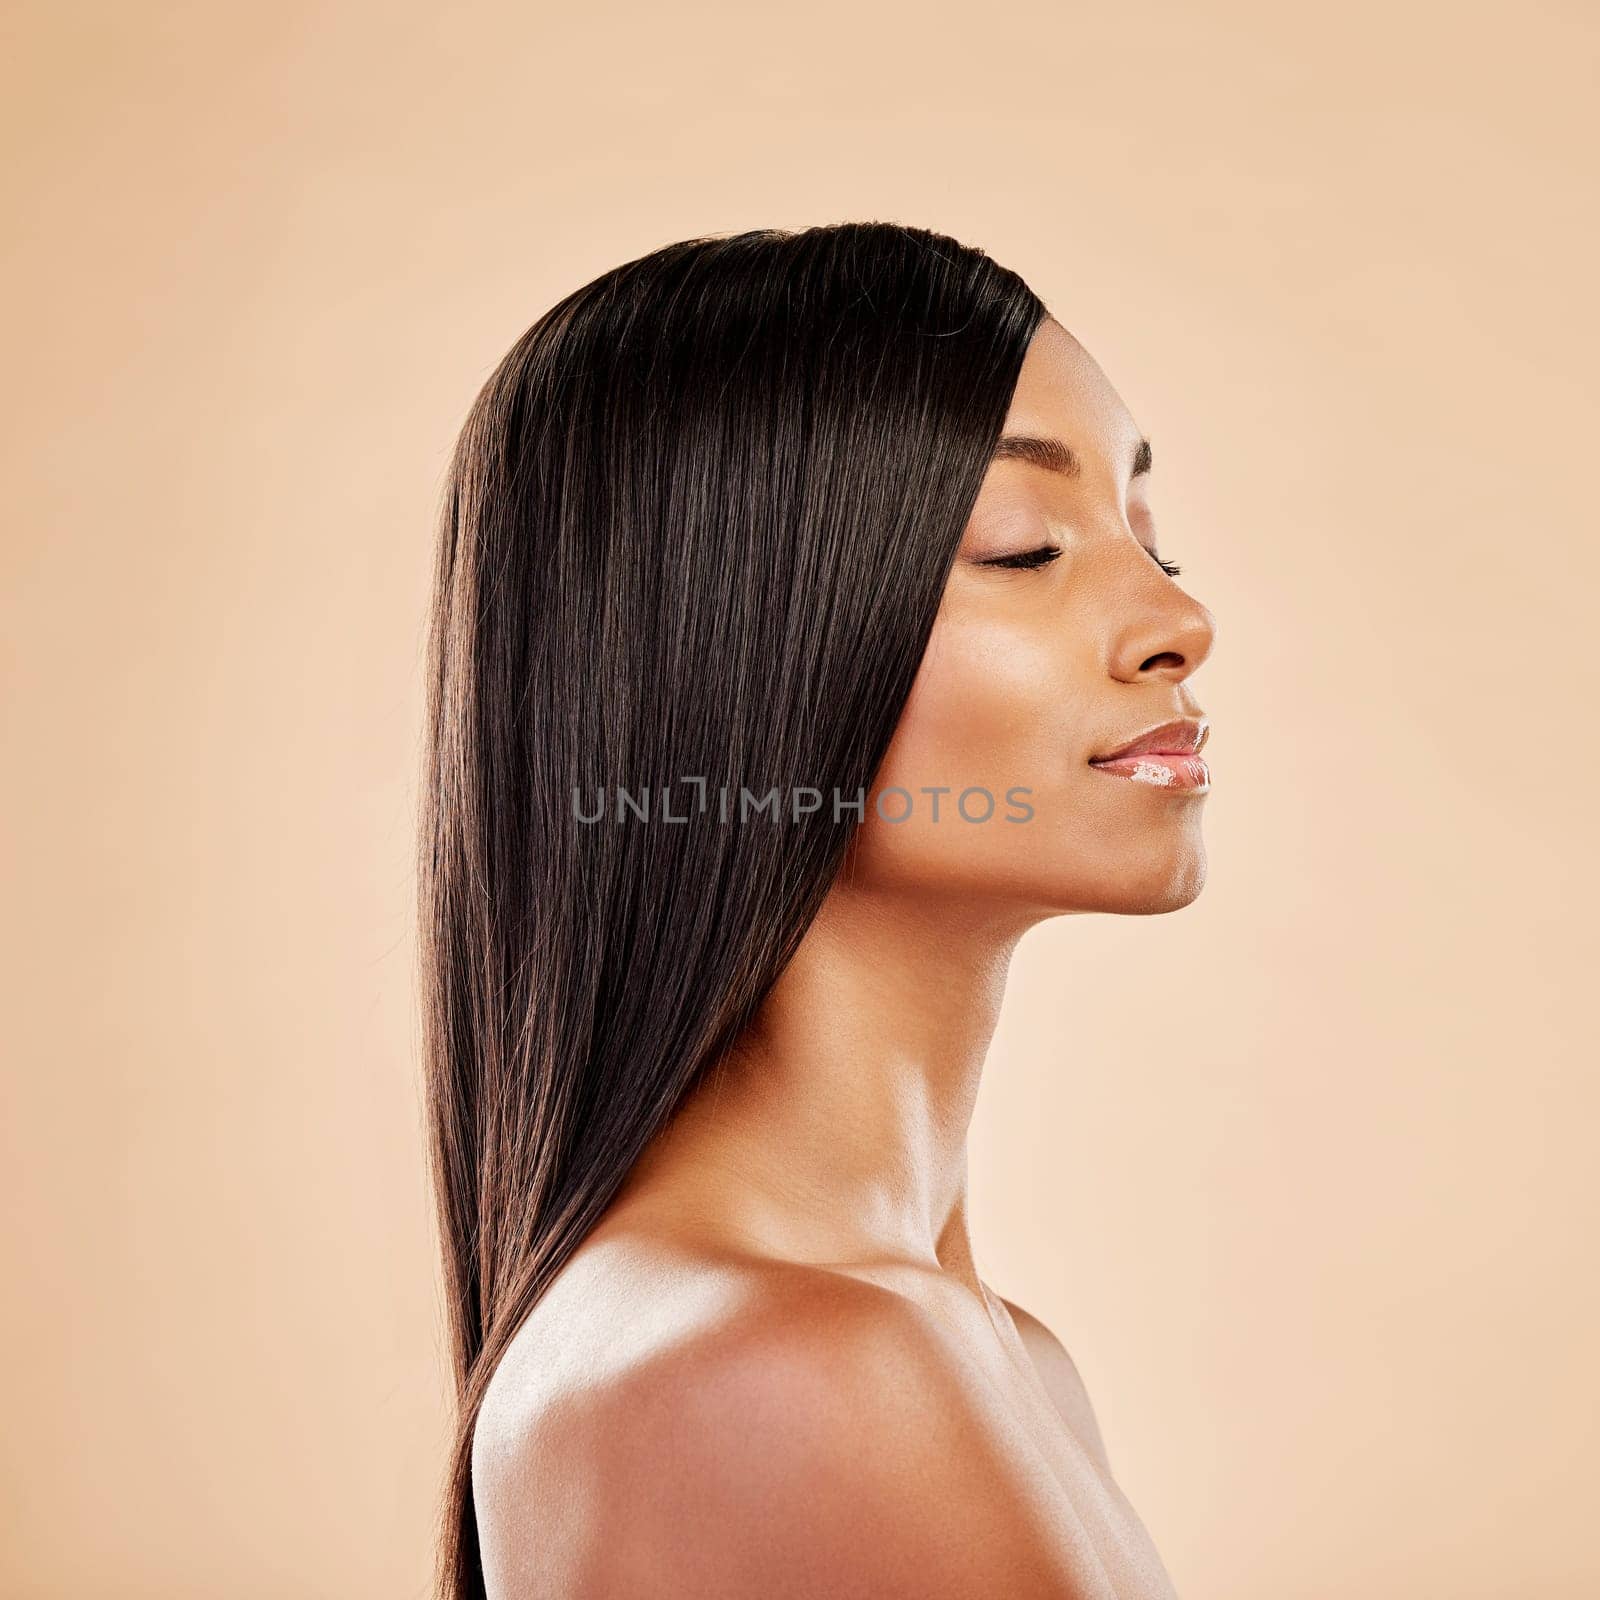 Beauty, hair care and profile of a woman in studio with natural glow and shine. Hairstyle, cosmetics and wellness of Indian person for hairdresser, makeup or salon results on a beige background.